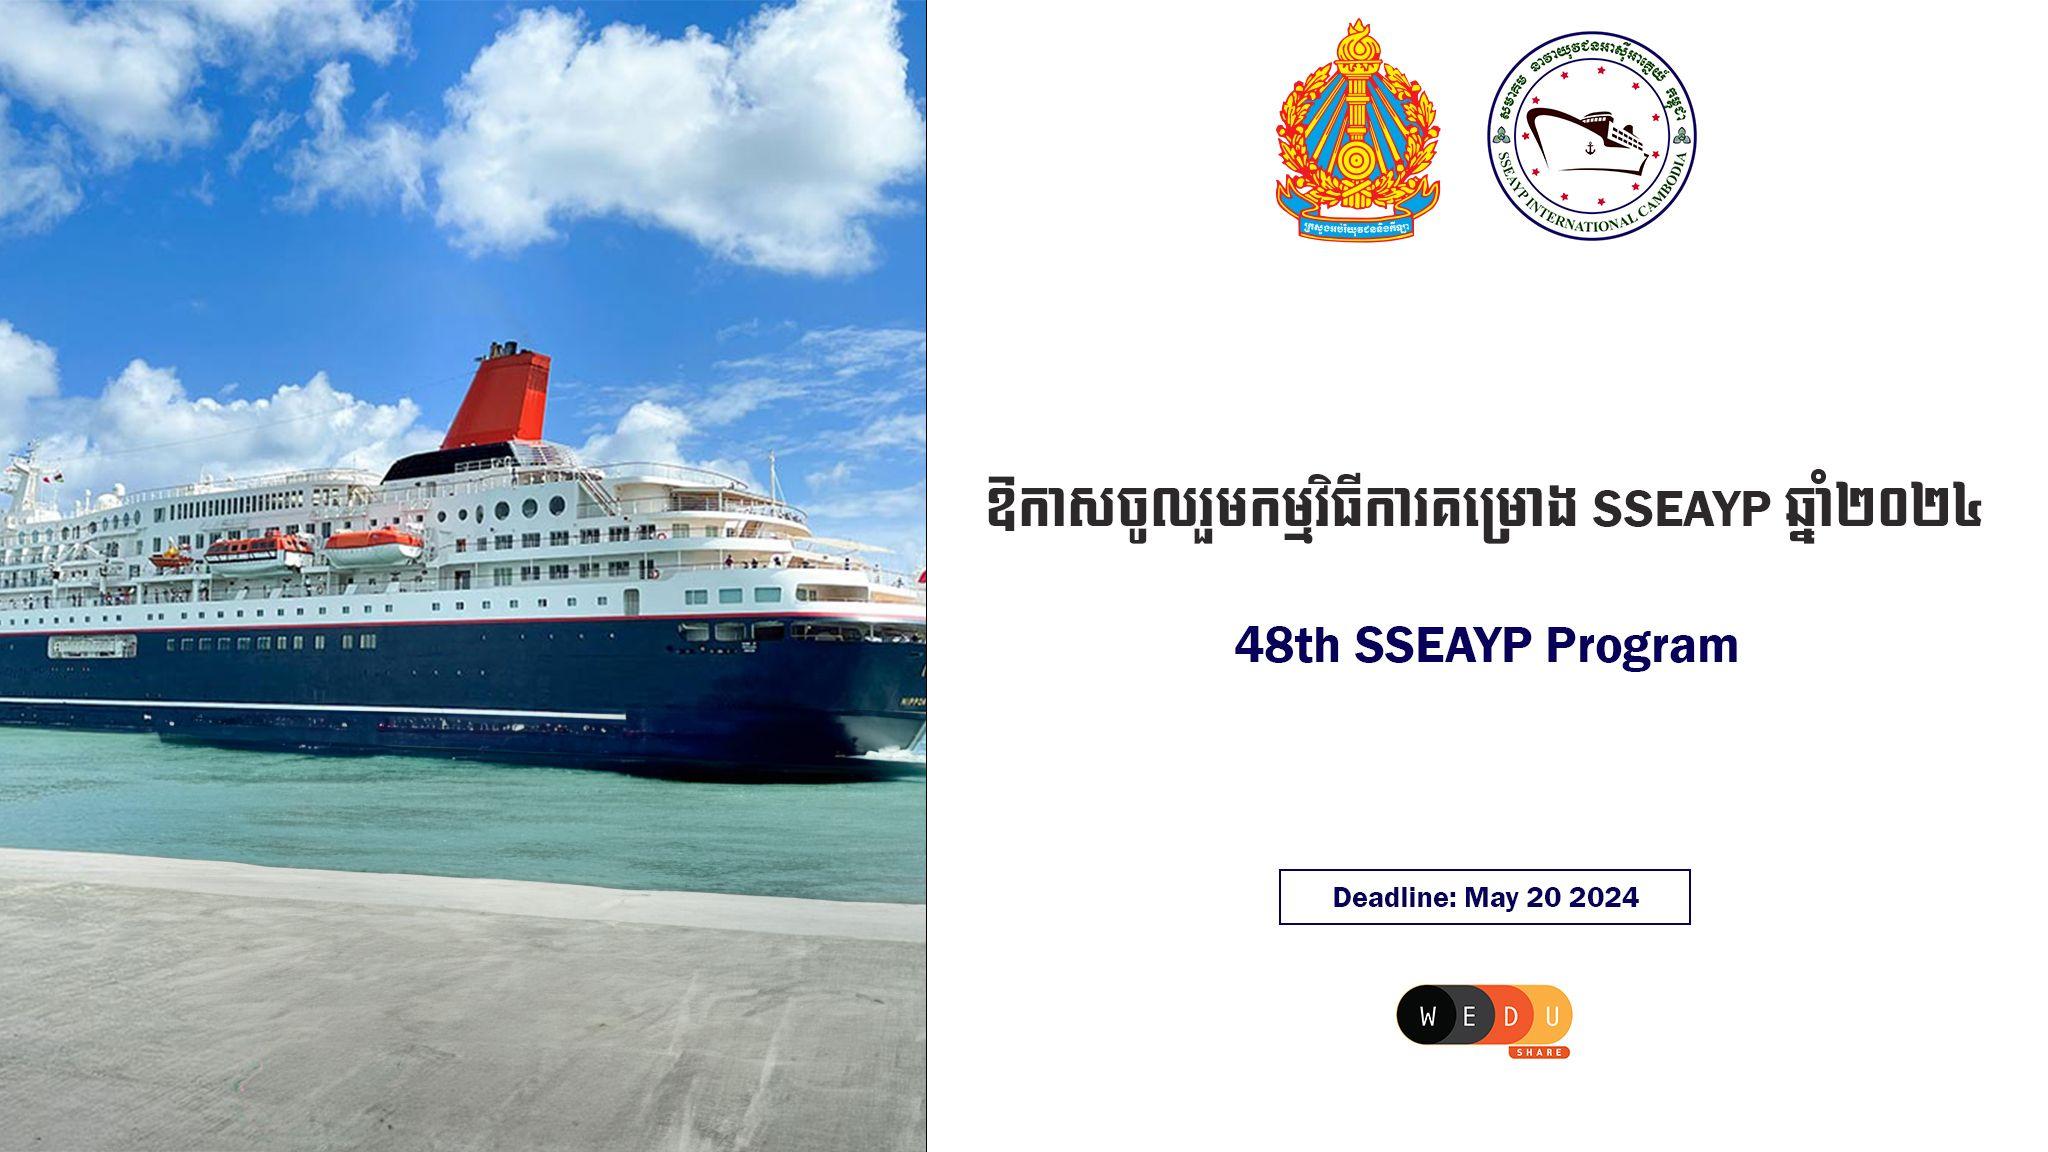 Ship for Southeast Asian and Japanese Youth Program (SSEAYP)